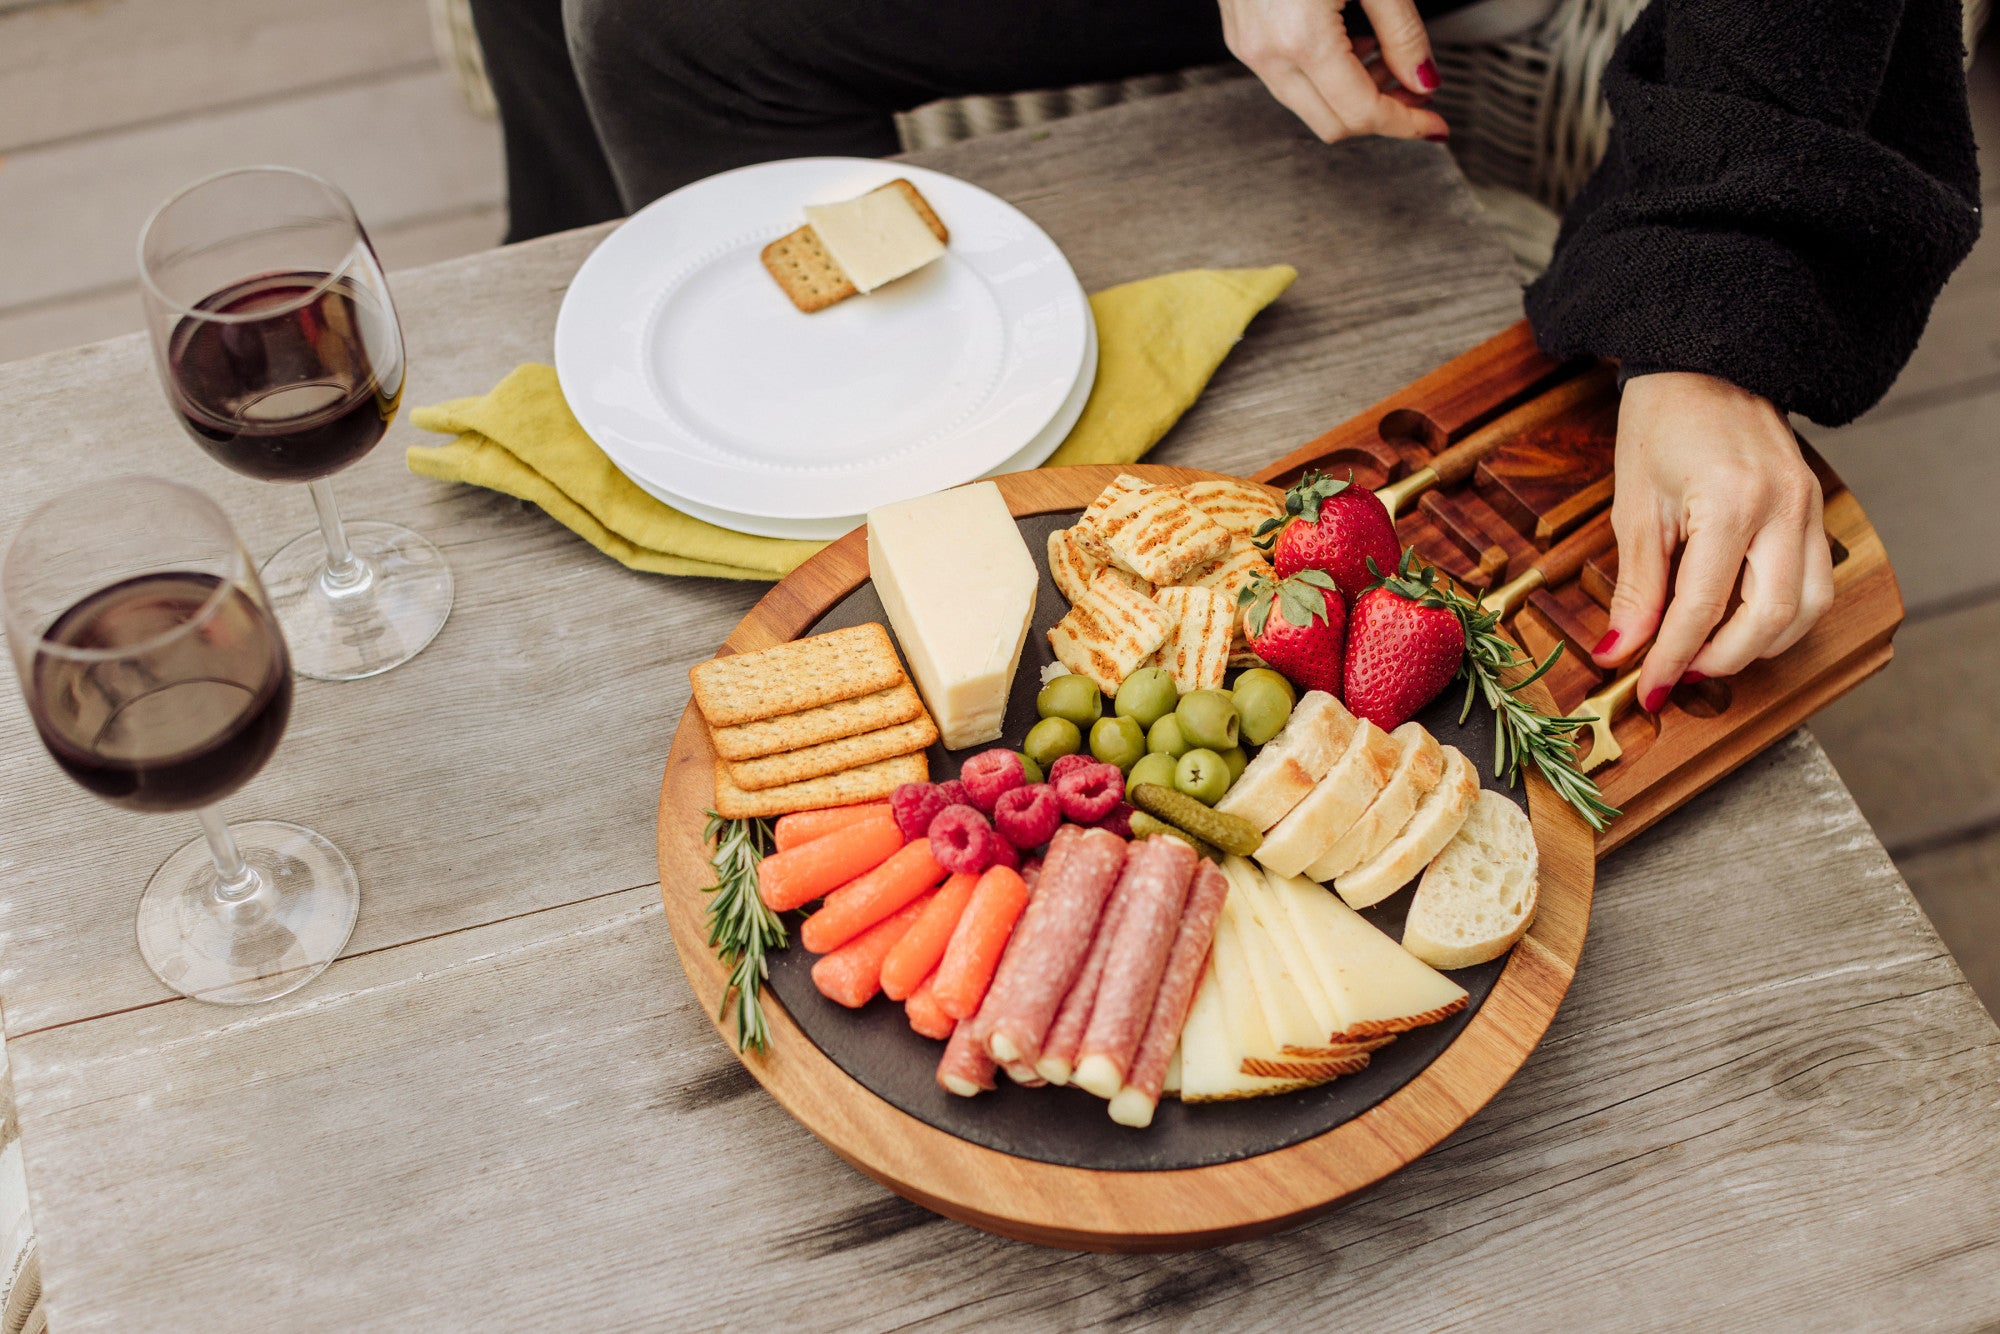 Picnic Time Swiss Cheese Board